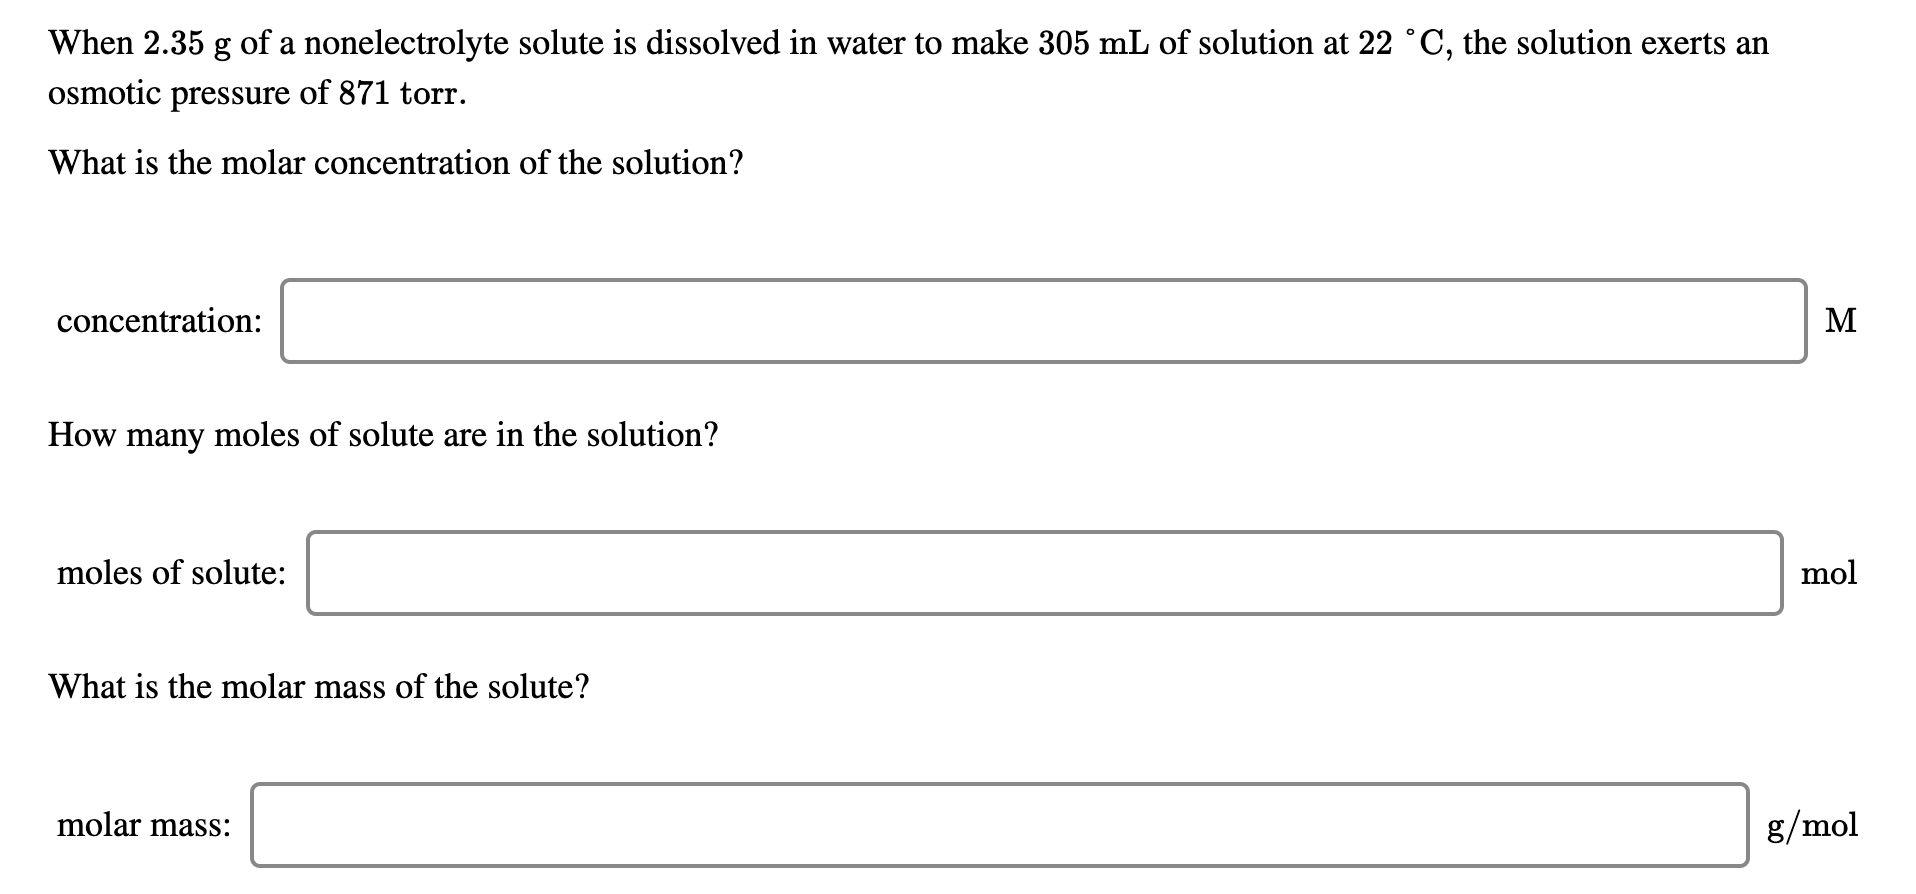 When 2.35 g of a nonelectrolyte solute is dissolved in water to make 305 mL of solution at 22 °C, the solution exerts an
osmotic pressure of 871 torr.
What is the molar concentration of the solution?
concentration:
M
How many moles of solute are in the solution?
moles of solute:
mol
What is the molar mass of the solute?
molar mass:
8/mol
